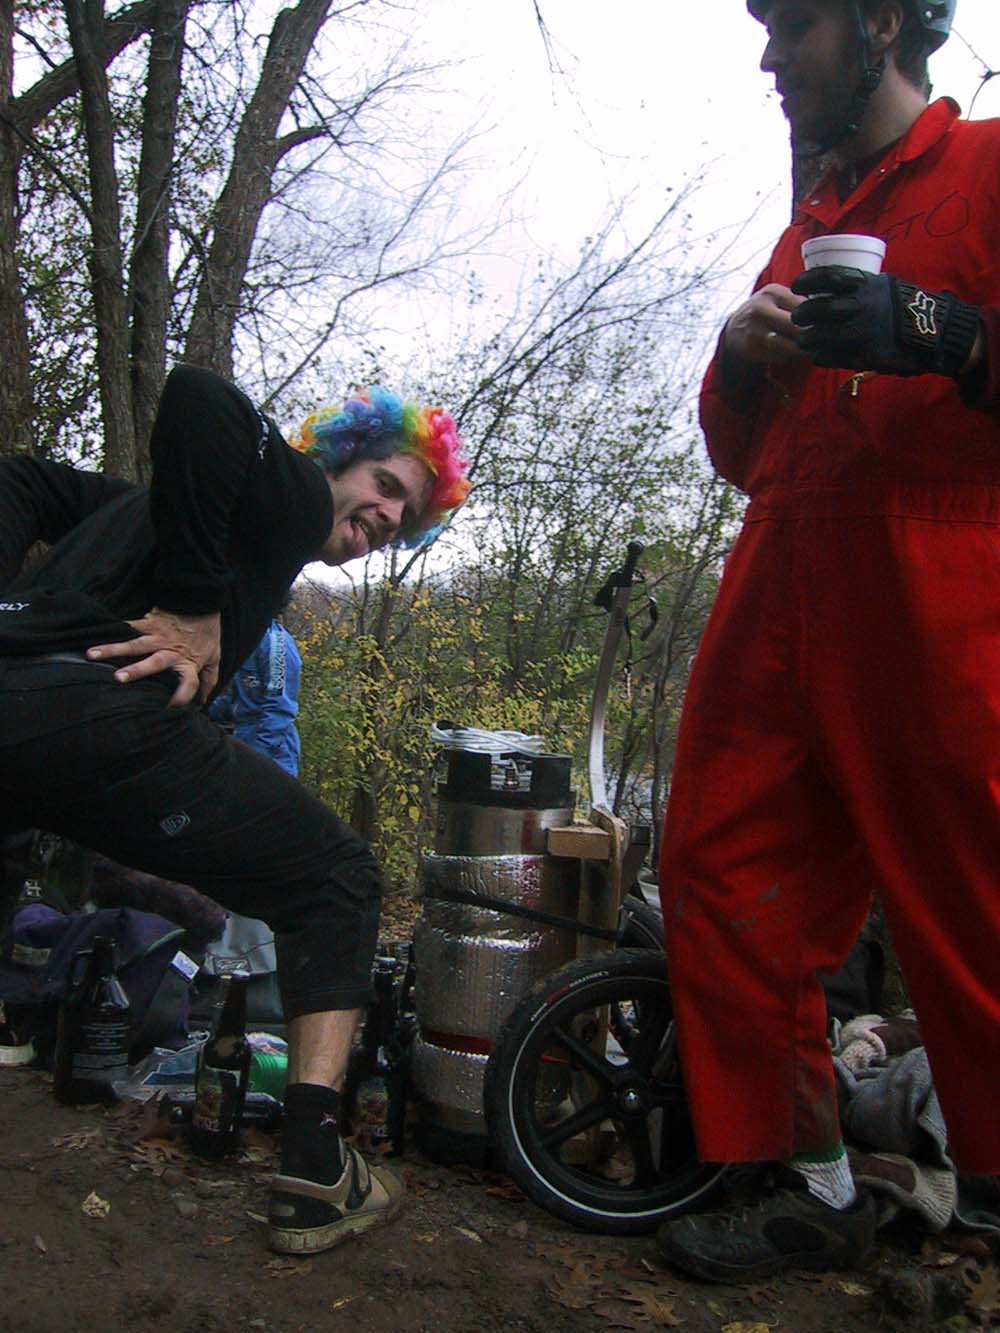 A person wear a rainbow wig and showing their rear end, next to a keg and a person in a red jump suit, in the woods